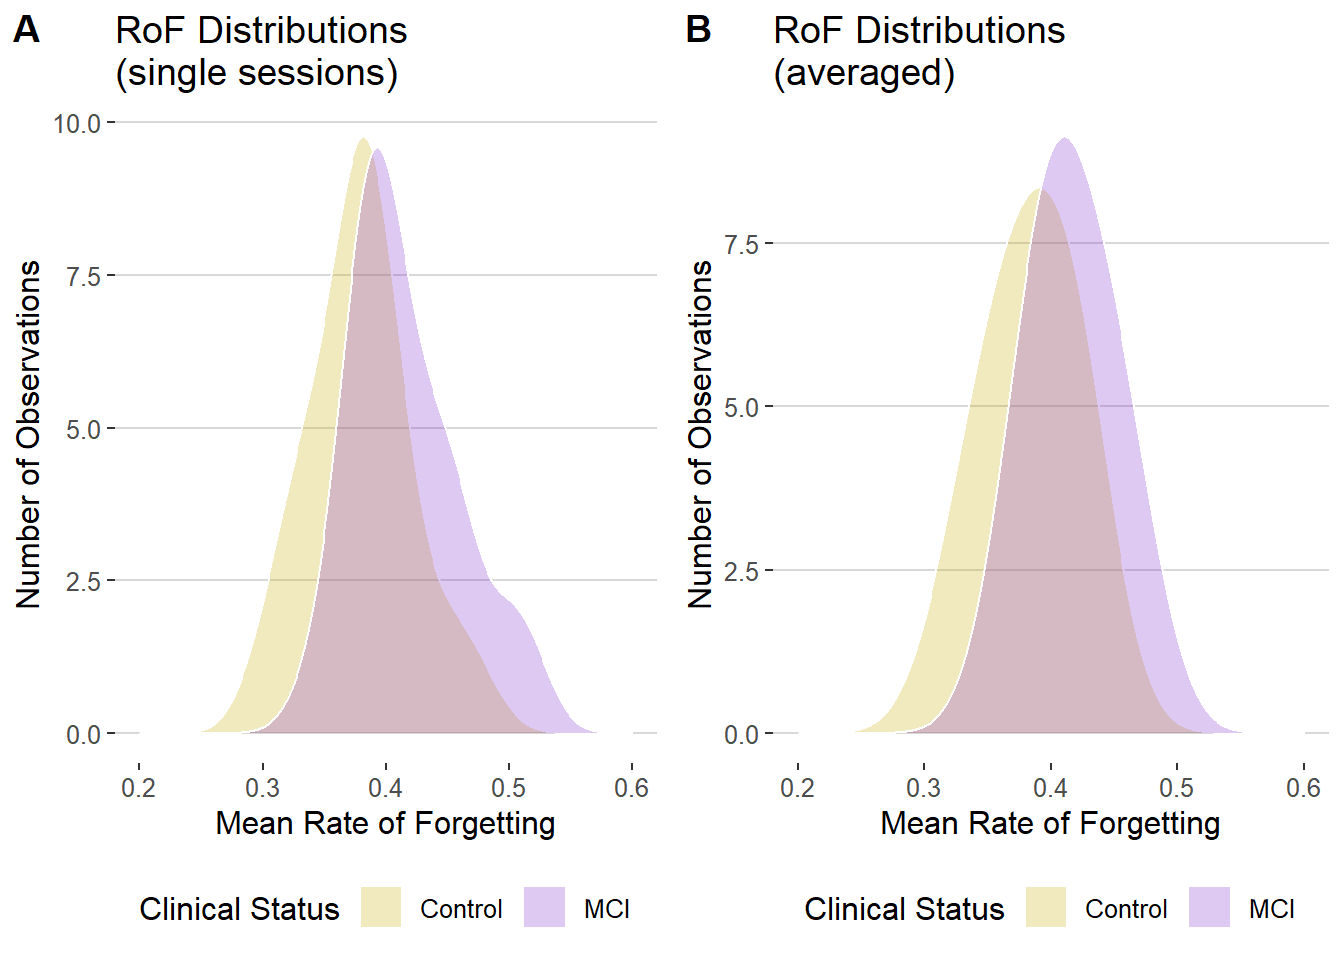 Distribution of Rate of Forgetting by Clinical Status